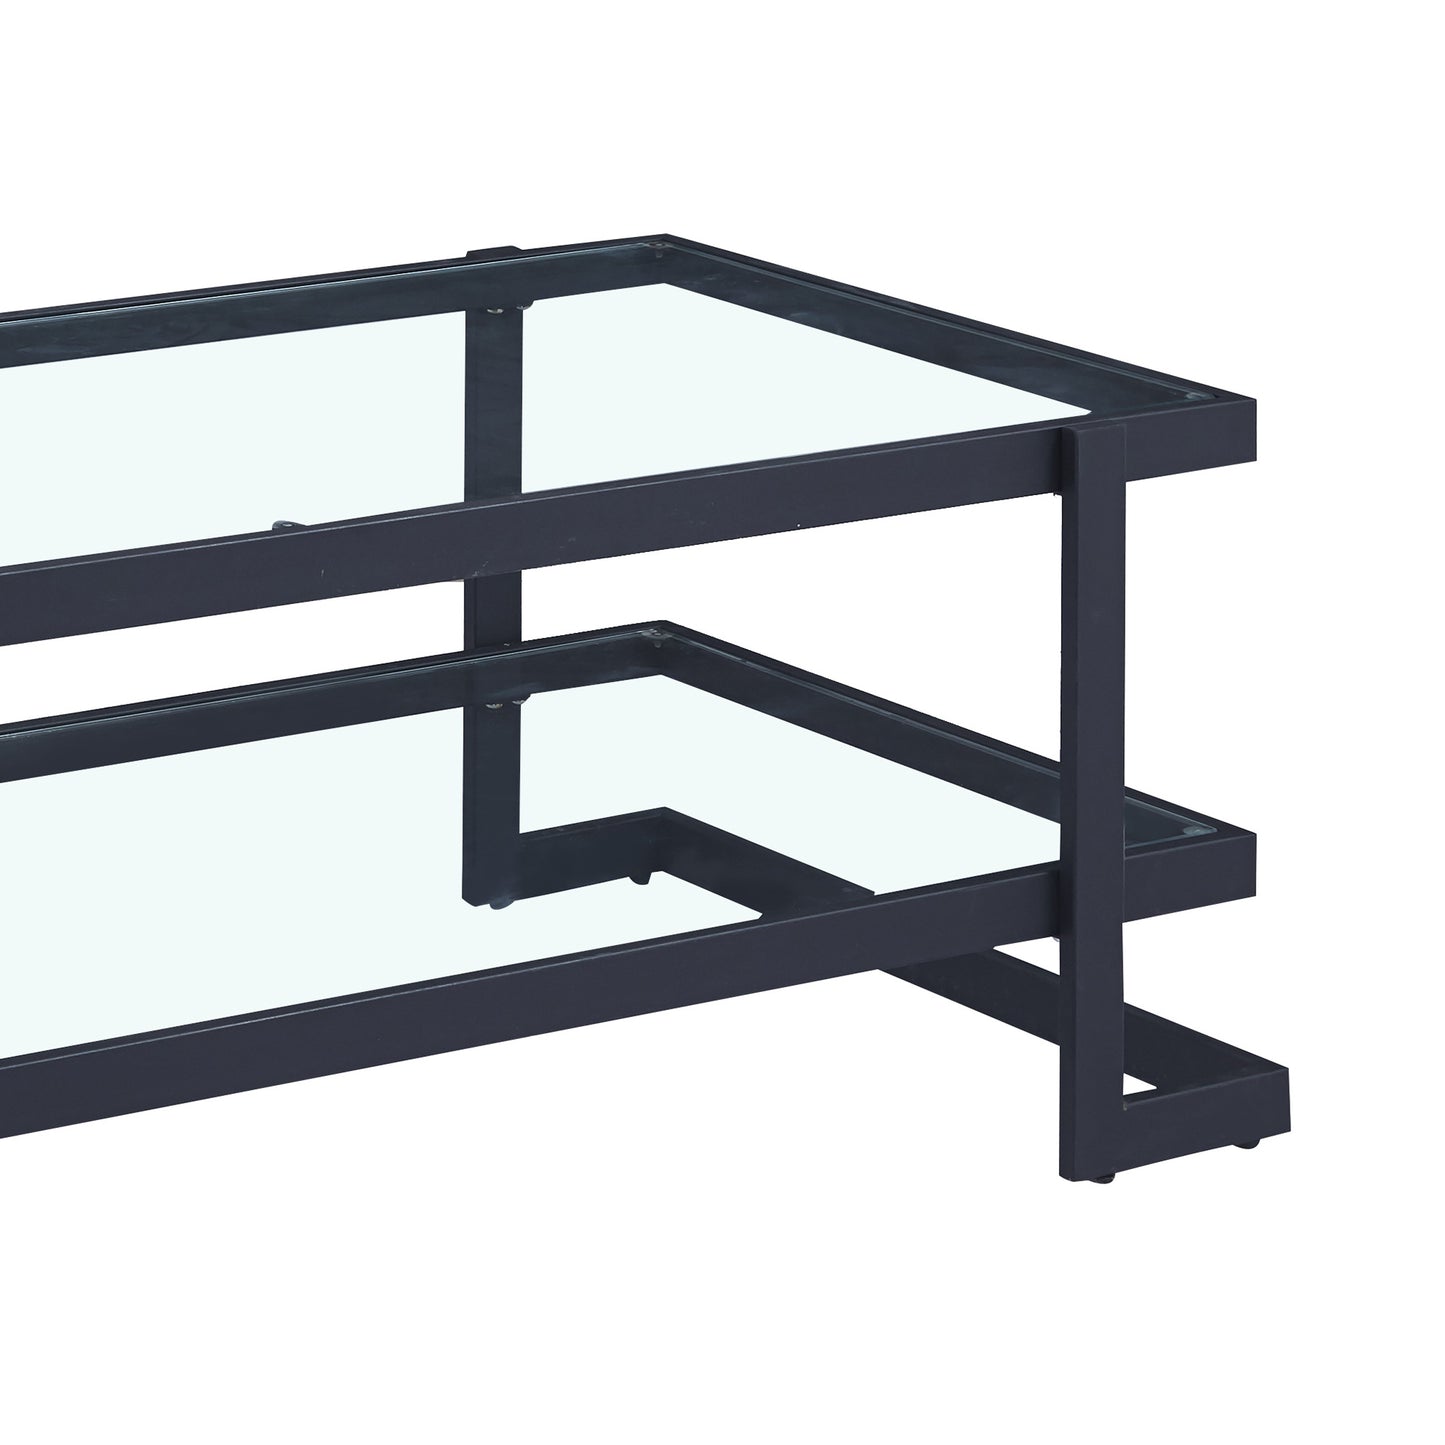 The Clara clear glass coffee table with matte black frame is generous in size and features two tiered display shelves.